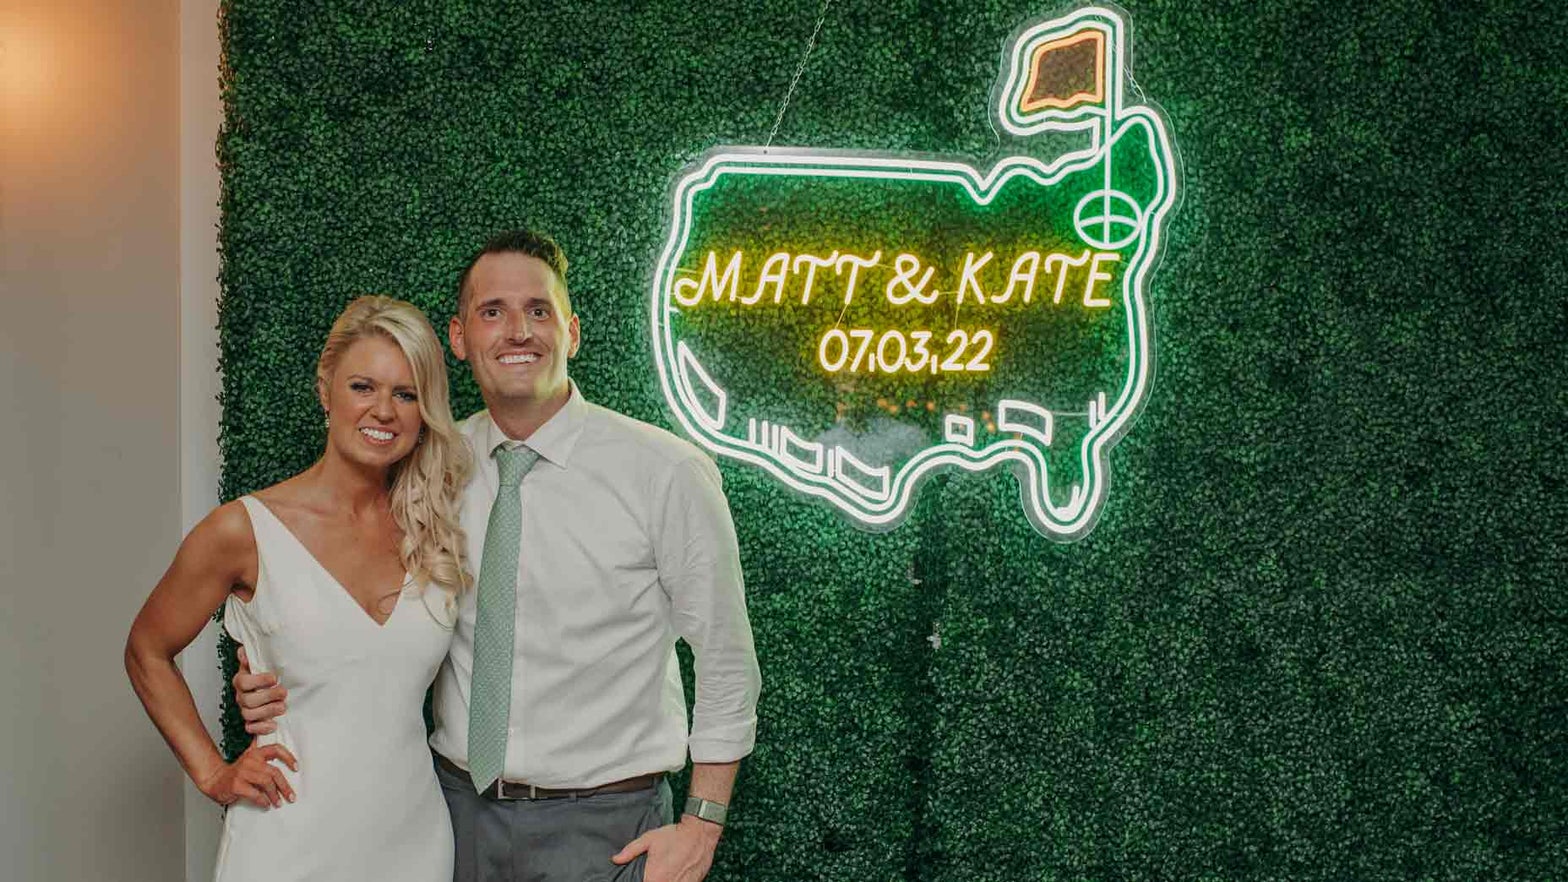 This epic Masters-themed wedding included a message from Jim Nantz